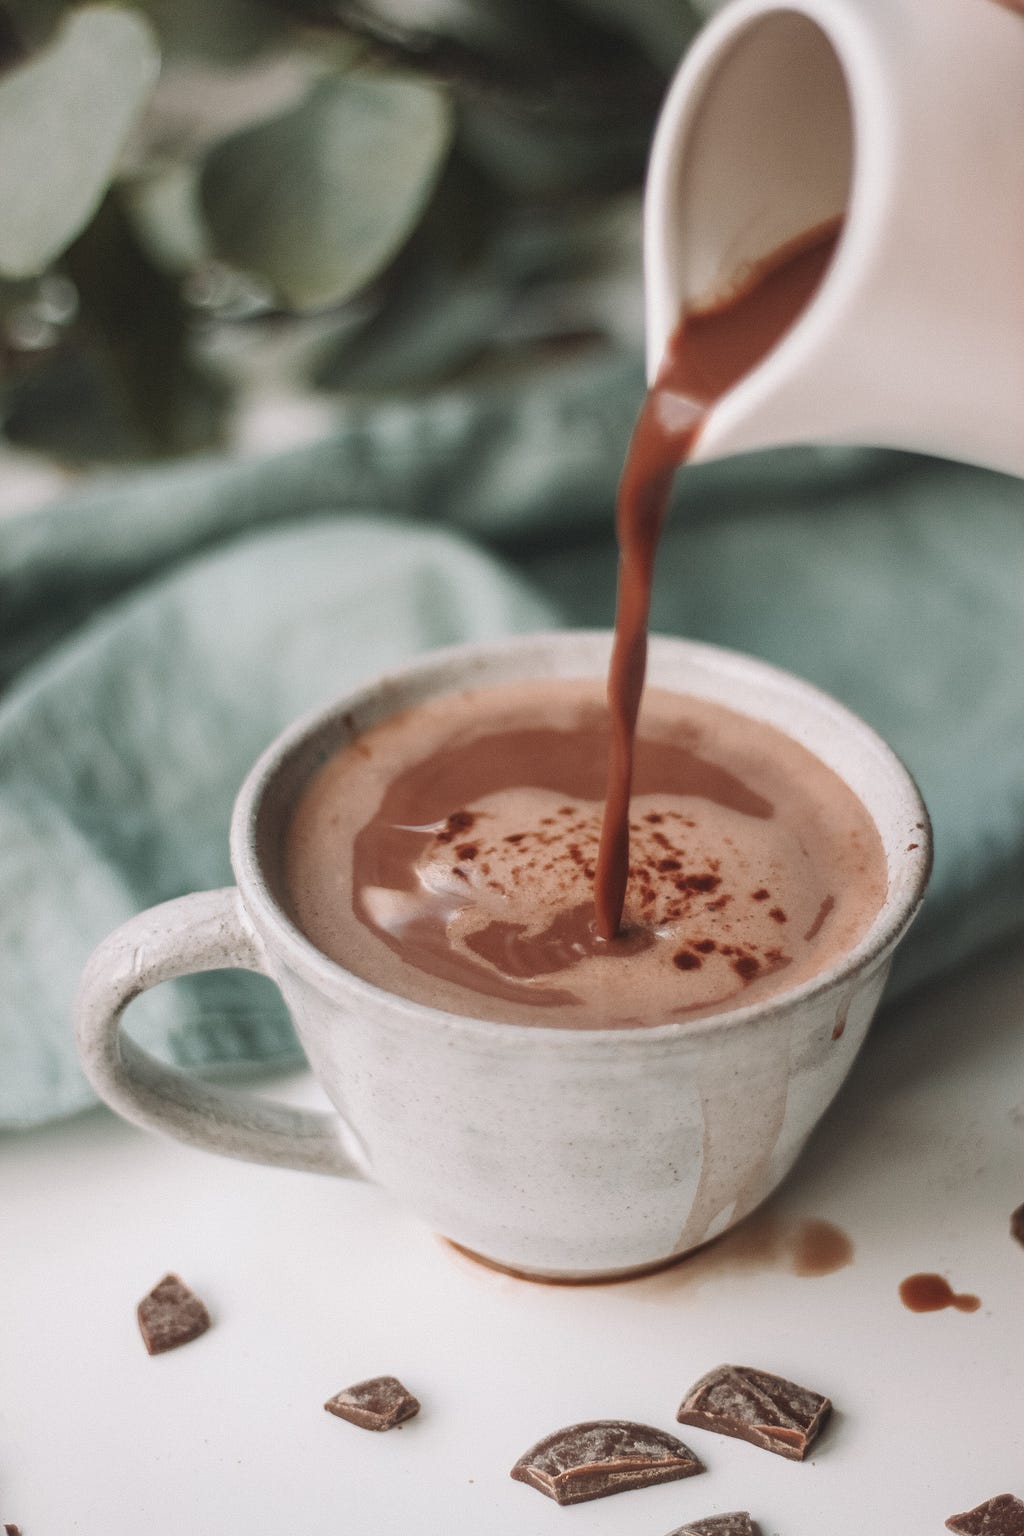 Pouring a cup of cocoa